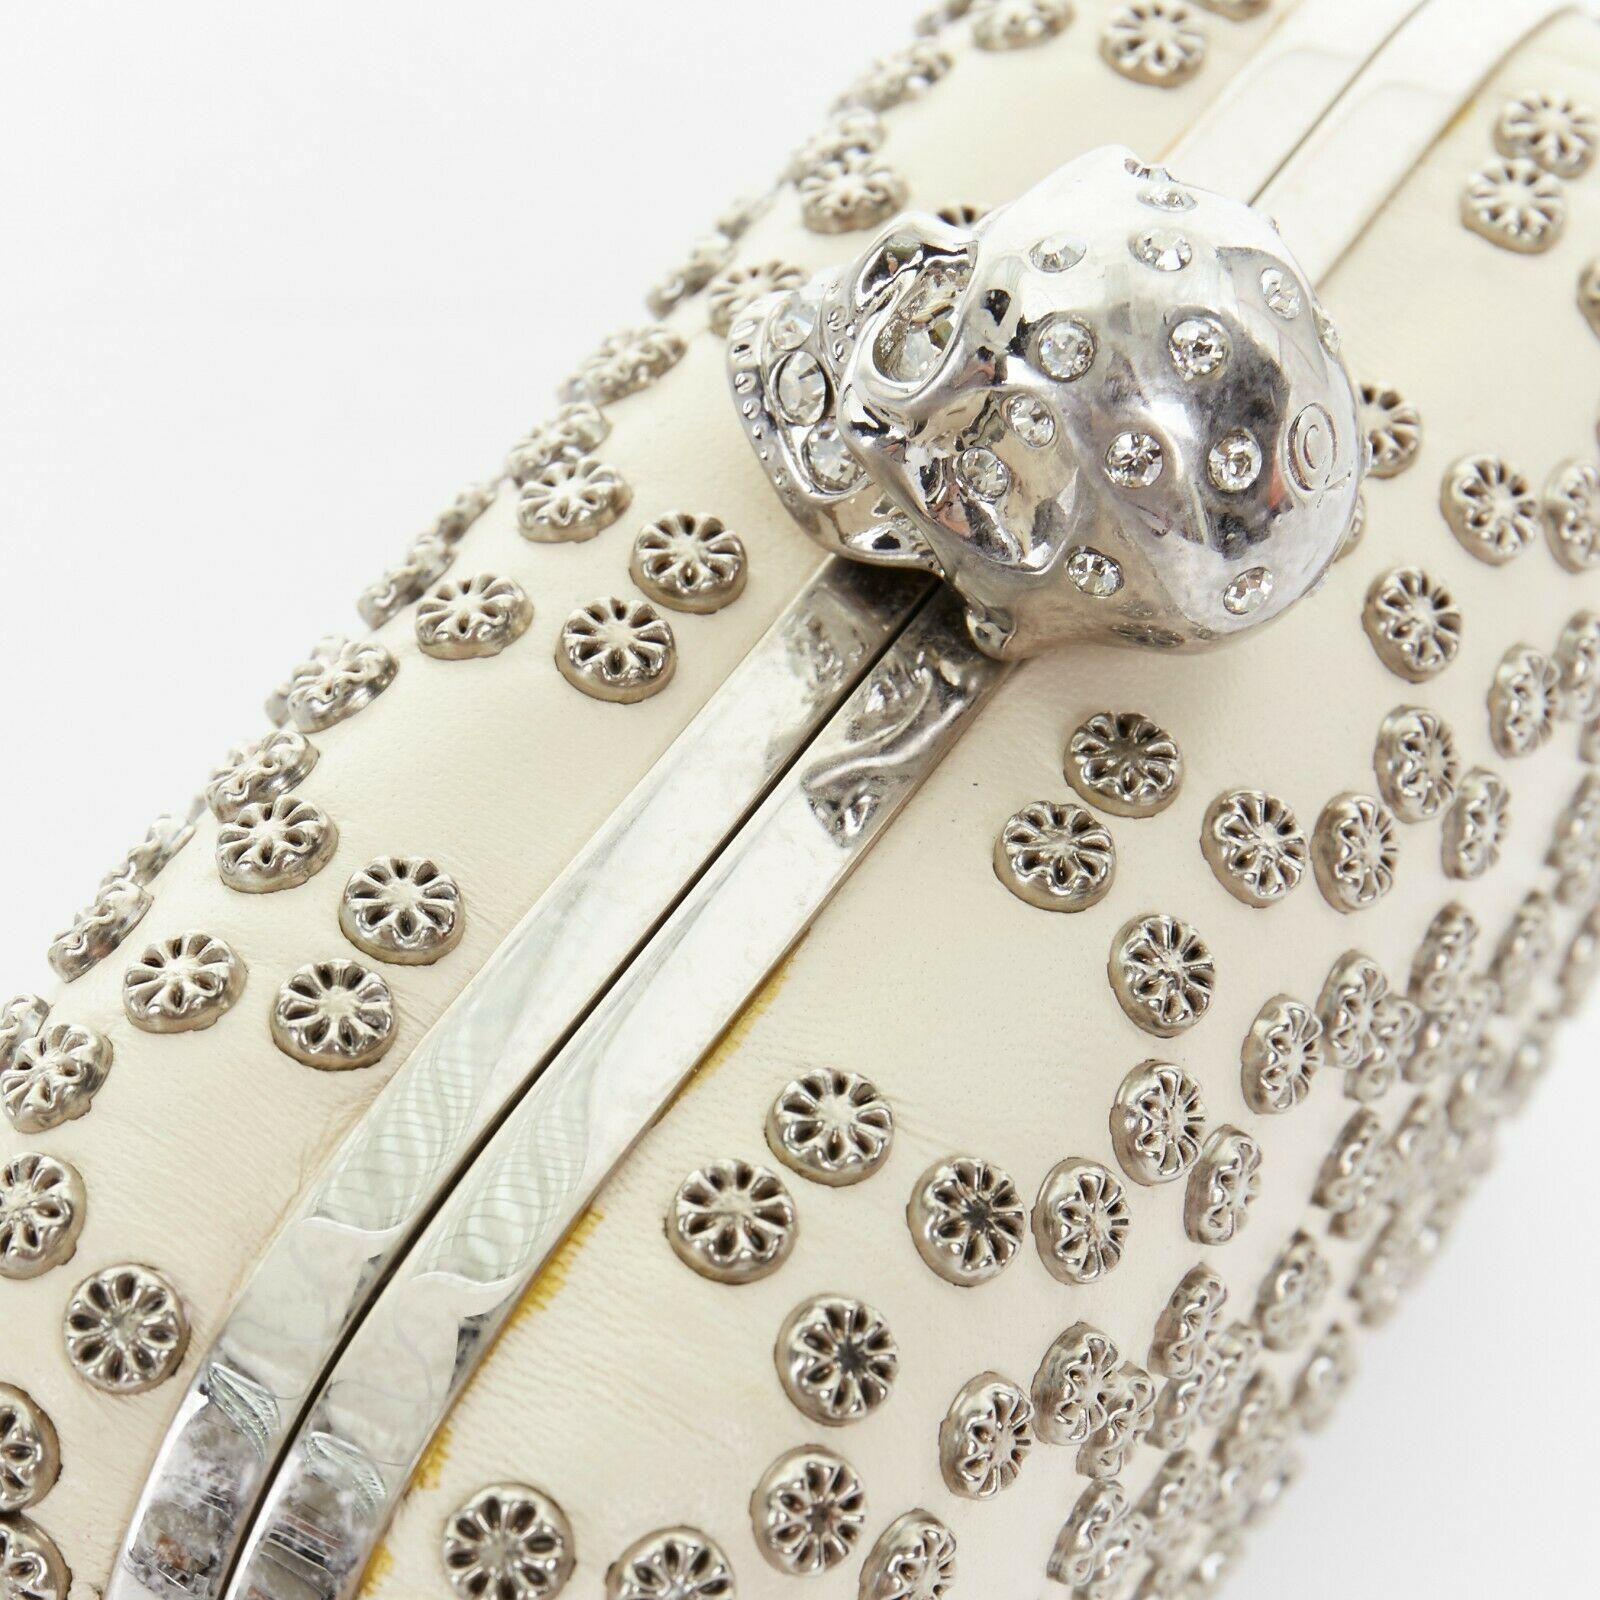 ALEXANDER MCQUEEN cream leather silver stud crystal embellished skull box clutch 7